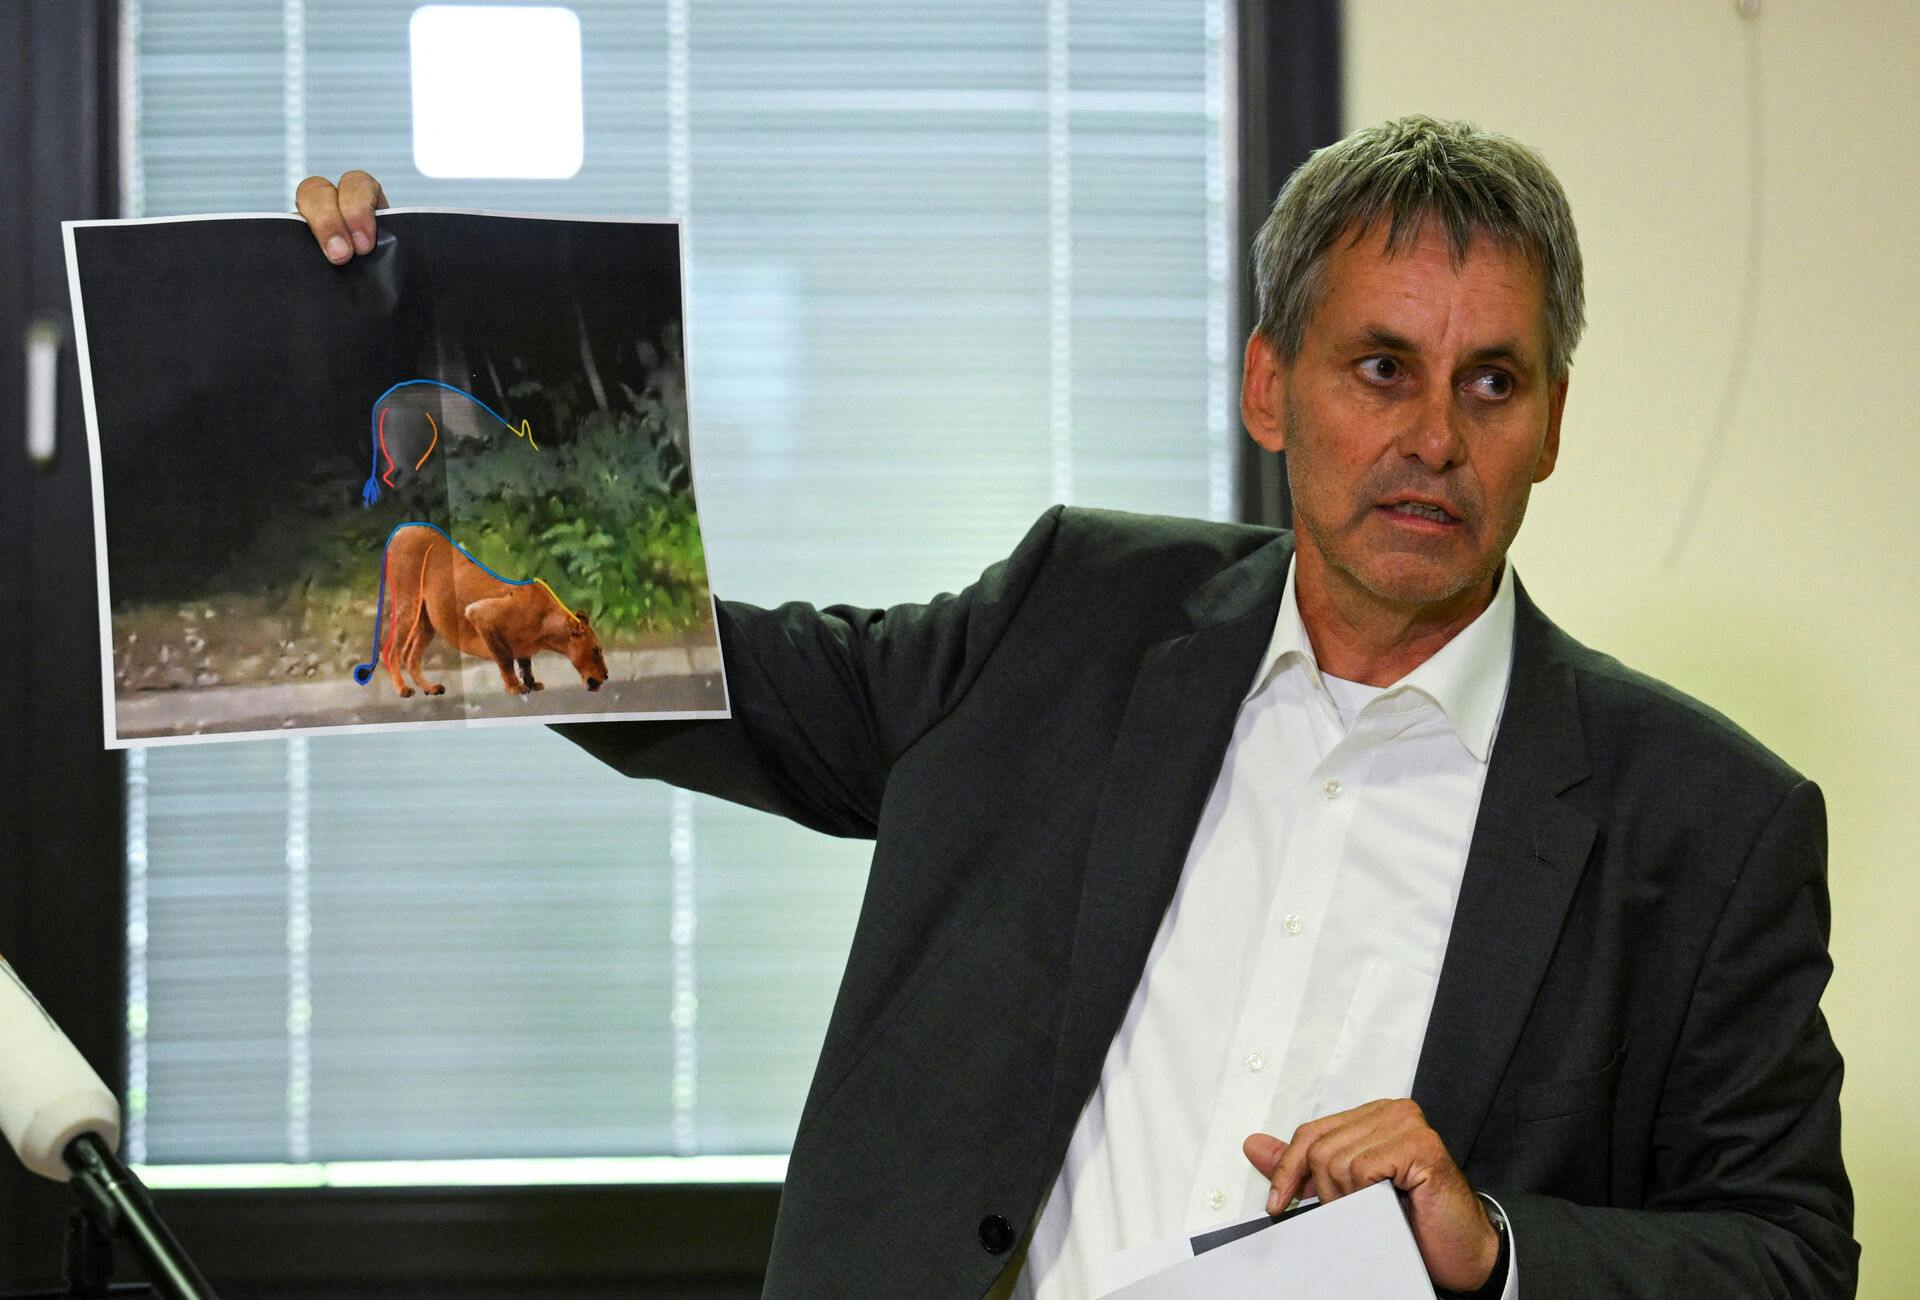 Michael Grubert, Mayor of Kleinmachnow, holds a picture which shows that suspected animal on the loose may not be a lion, according to experts, in Kleinmachnow, Germany July 21, 2023. REUTERS/Annegret Hilse